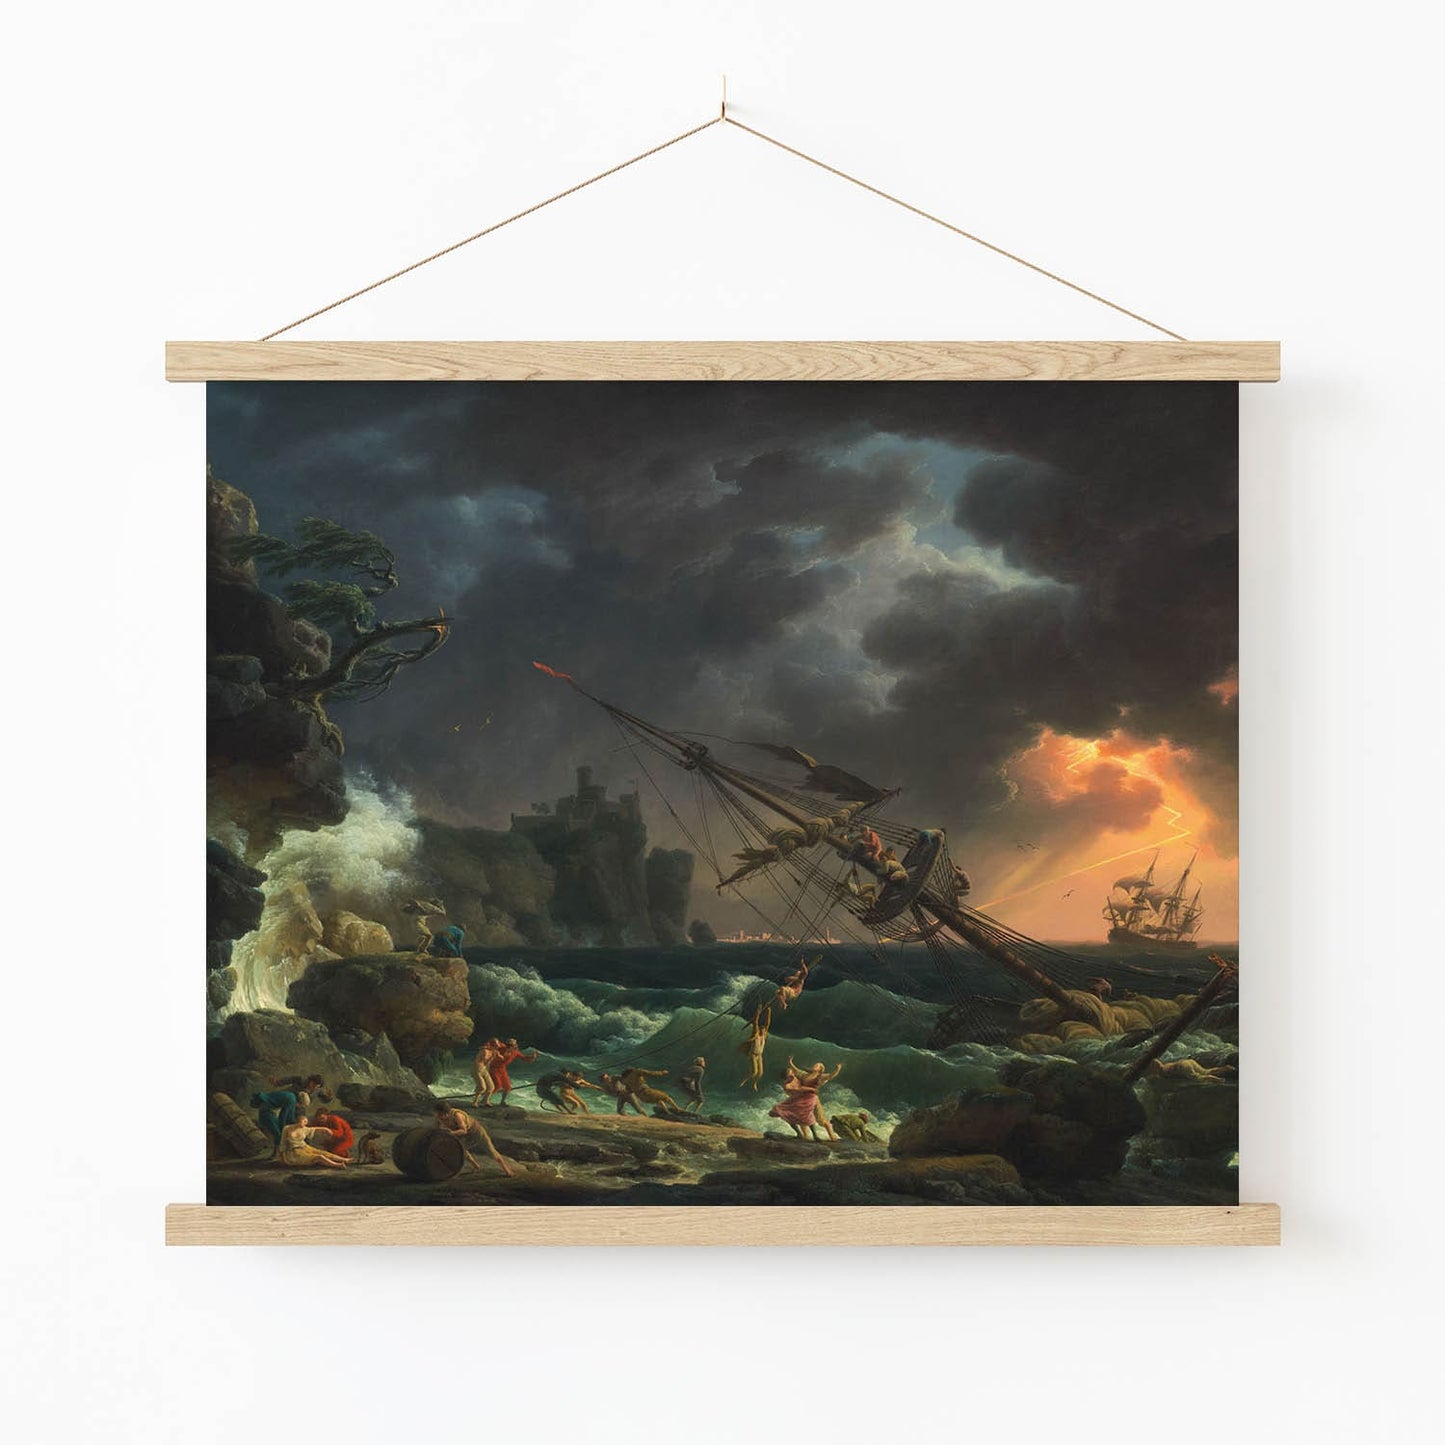 Antique Sea Painting Art Print in Wood Hanger Frame on Wall